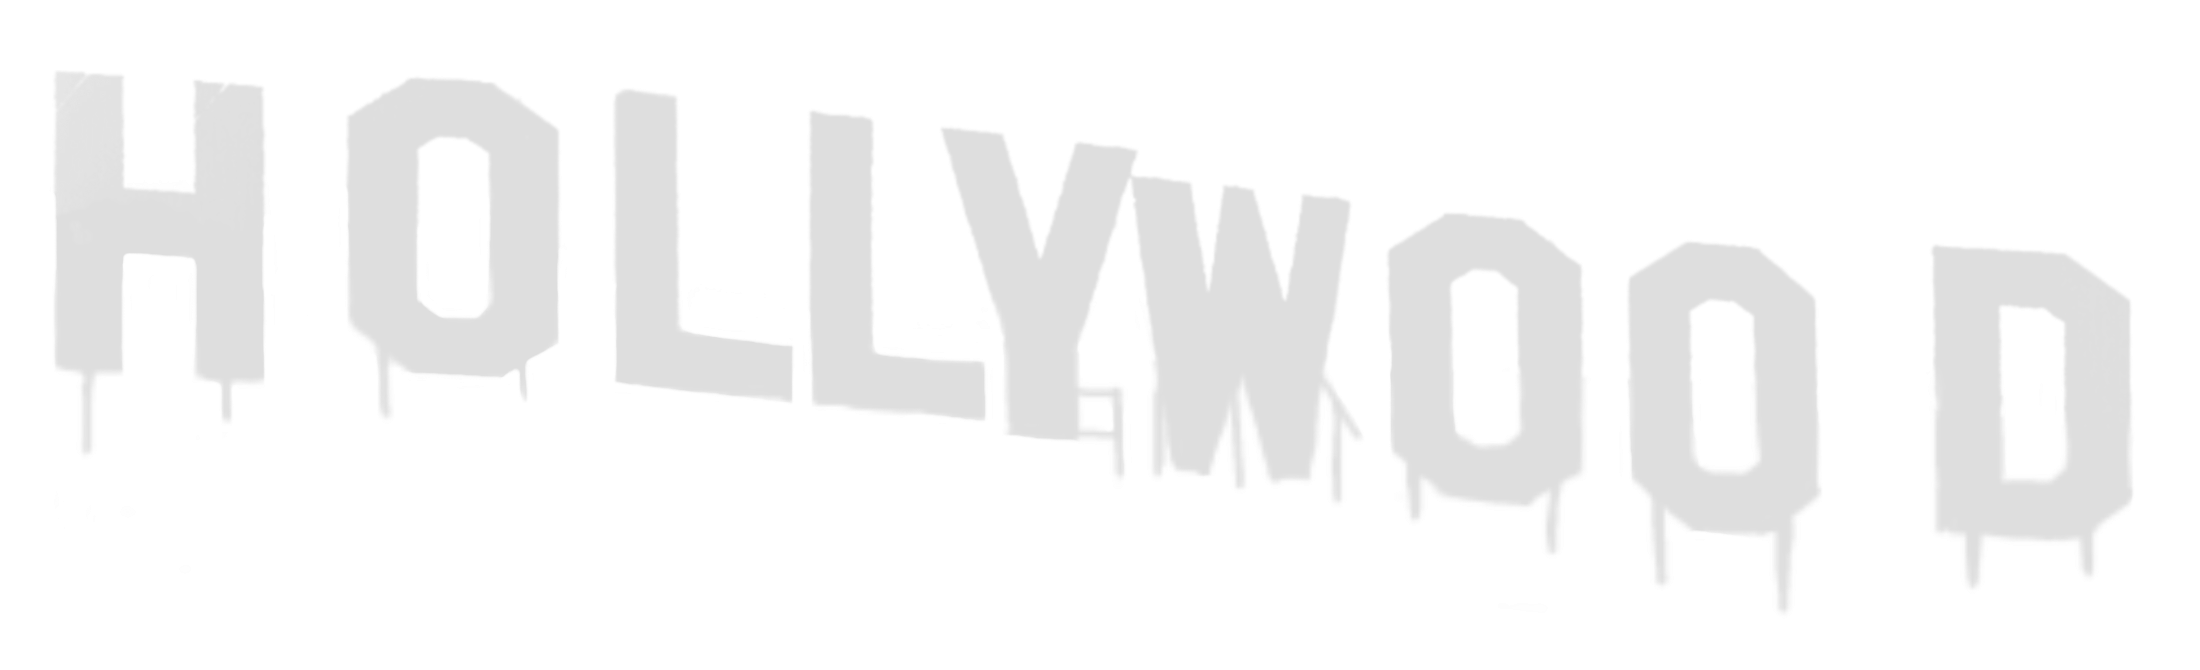 Hollywood Sign Png Png Image Collection